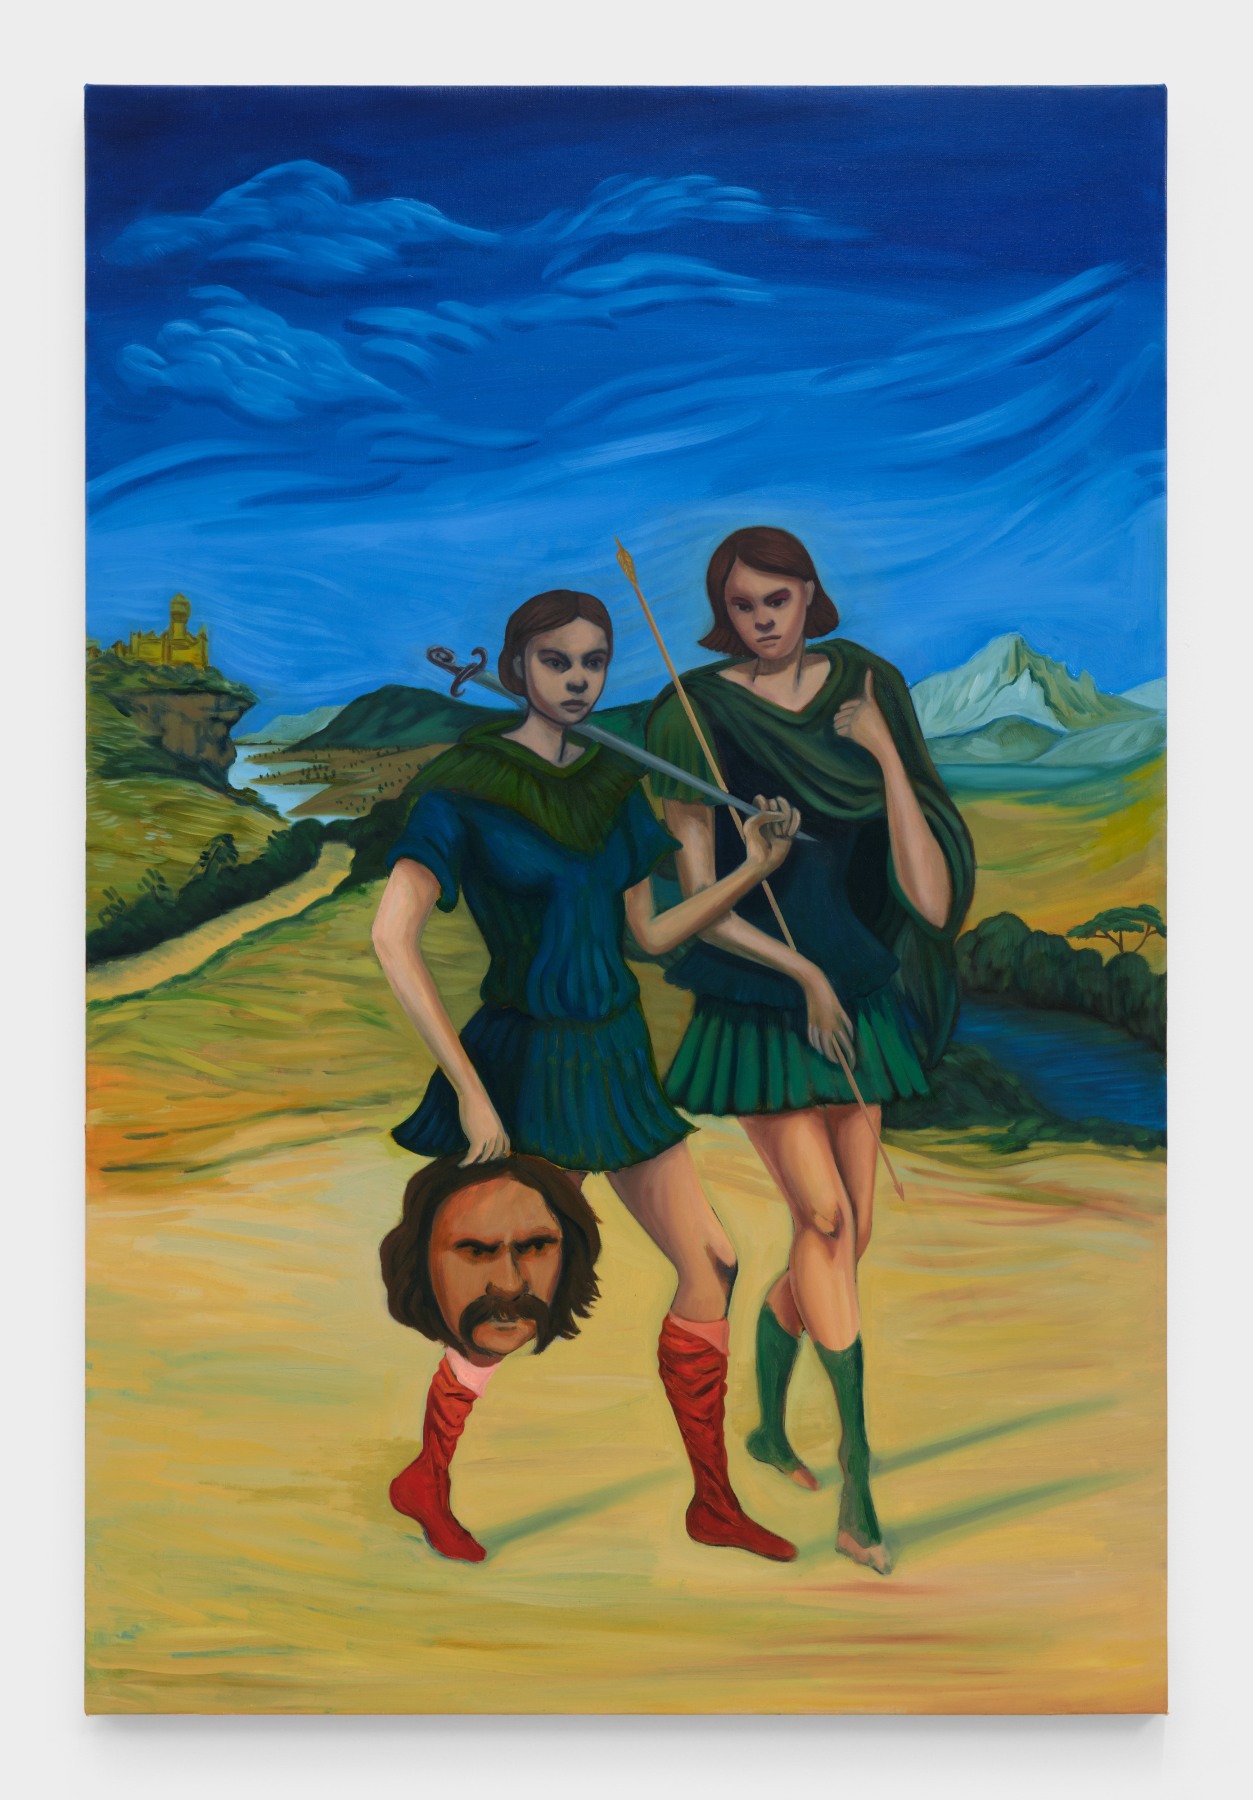 Bambou Gili's artwork "David & Jonathan". Two people carrying weapons walk through a mountainous landscape carrying a decapitated head of a man. 36 x 24 in (91.4 x 61 cm), oil on linen, 2023